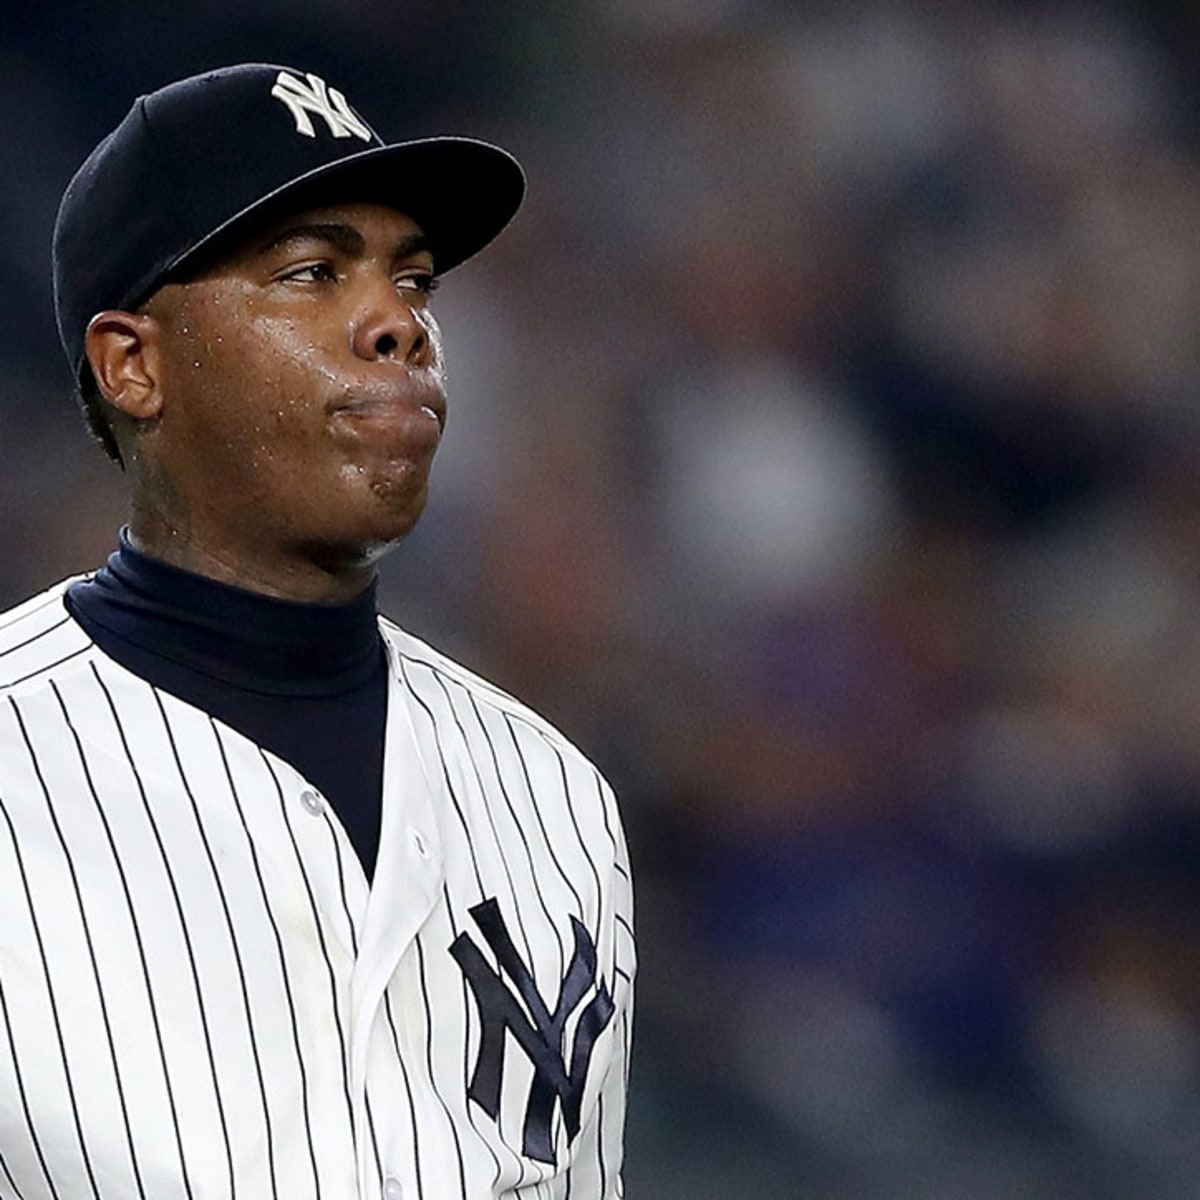 Aroldis Chapman apologizes for liking Instagram comment - Sports Illustrated